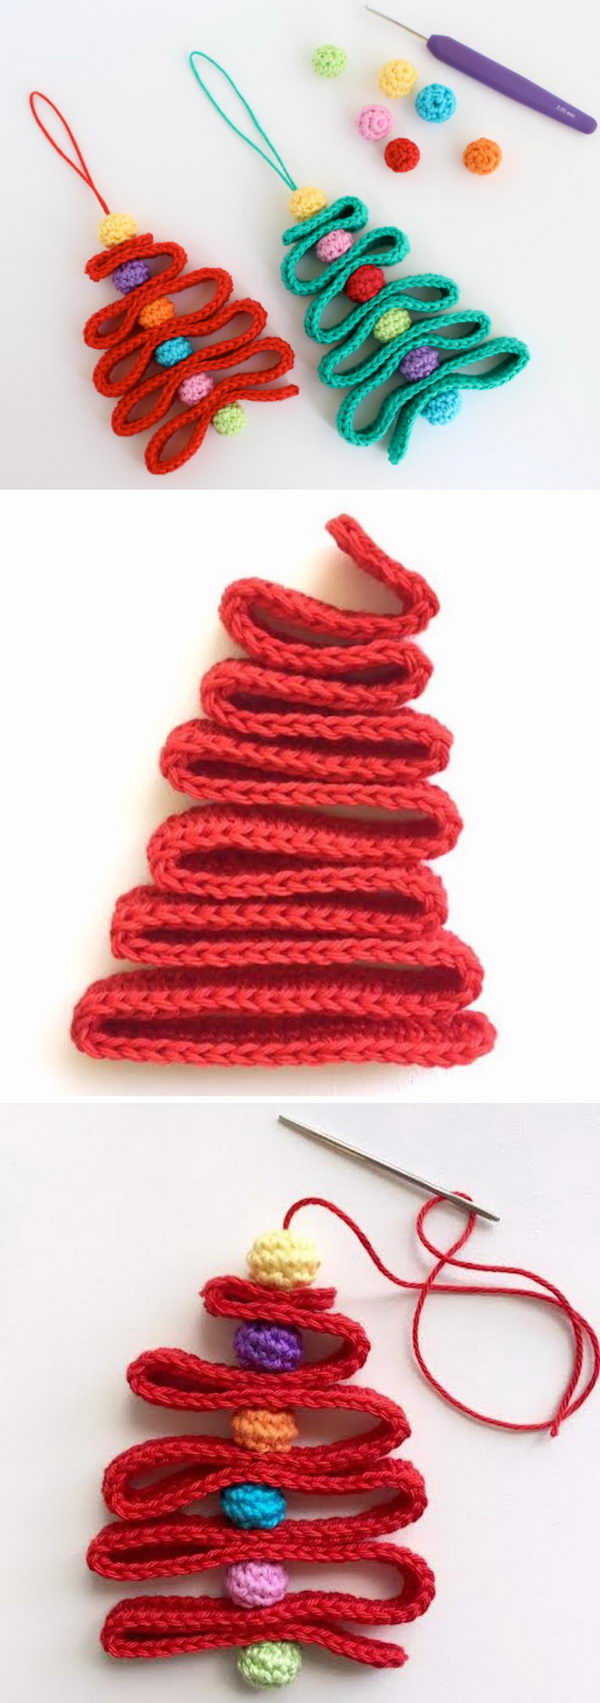 25+ Free Christmas Crochet Patterns For Beginners - Hative